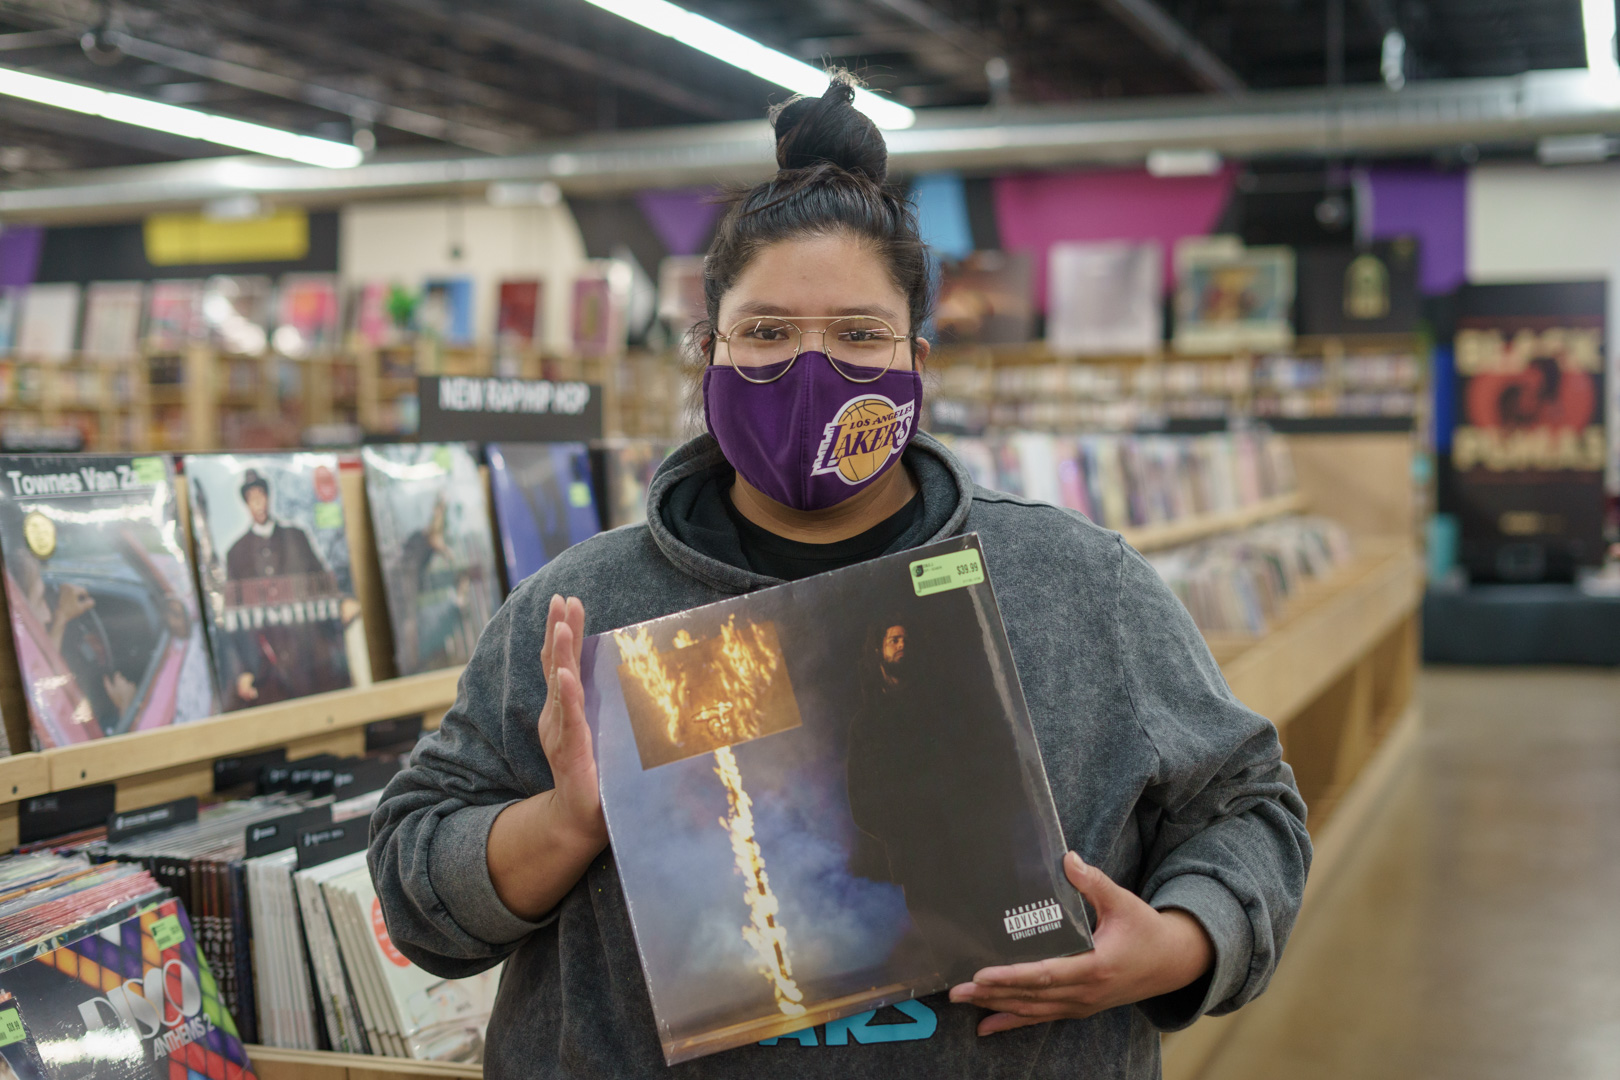 A woman with her hair up in a top bun and wearing purple Lakers face mask holds a vinyl record with a portrait of J. Cole and a street sign on fire. 